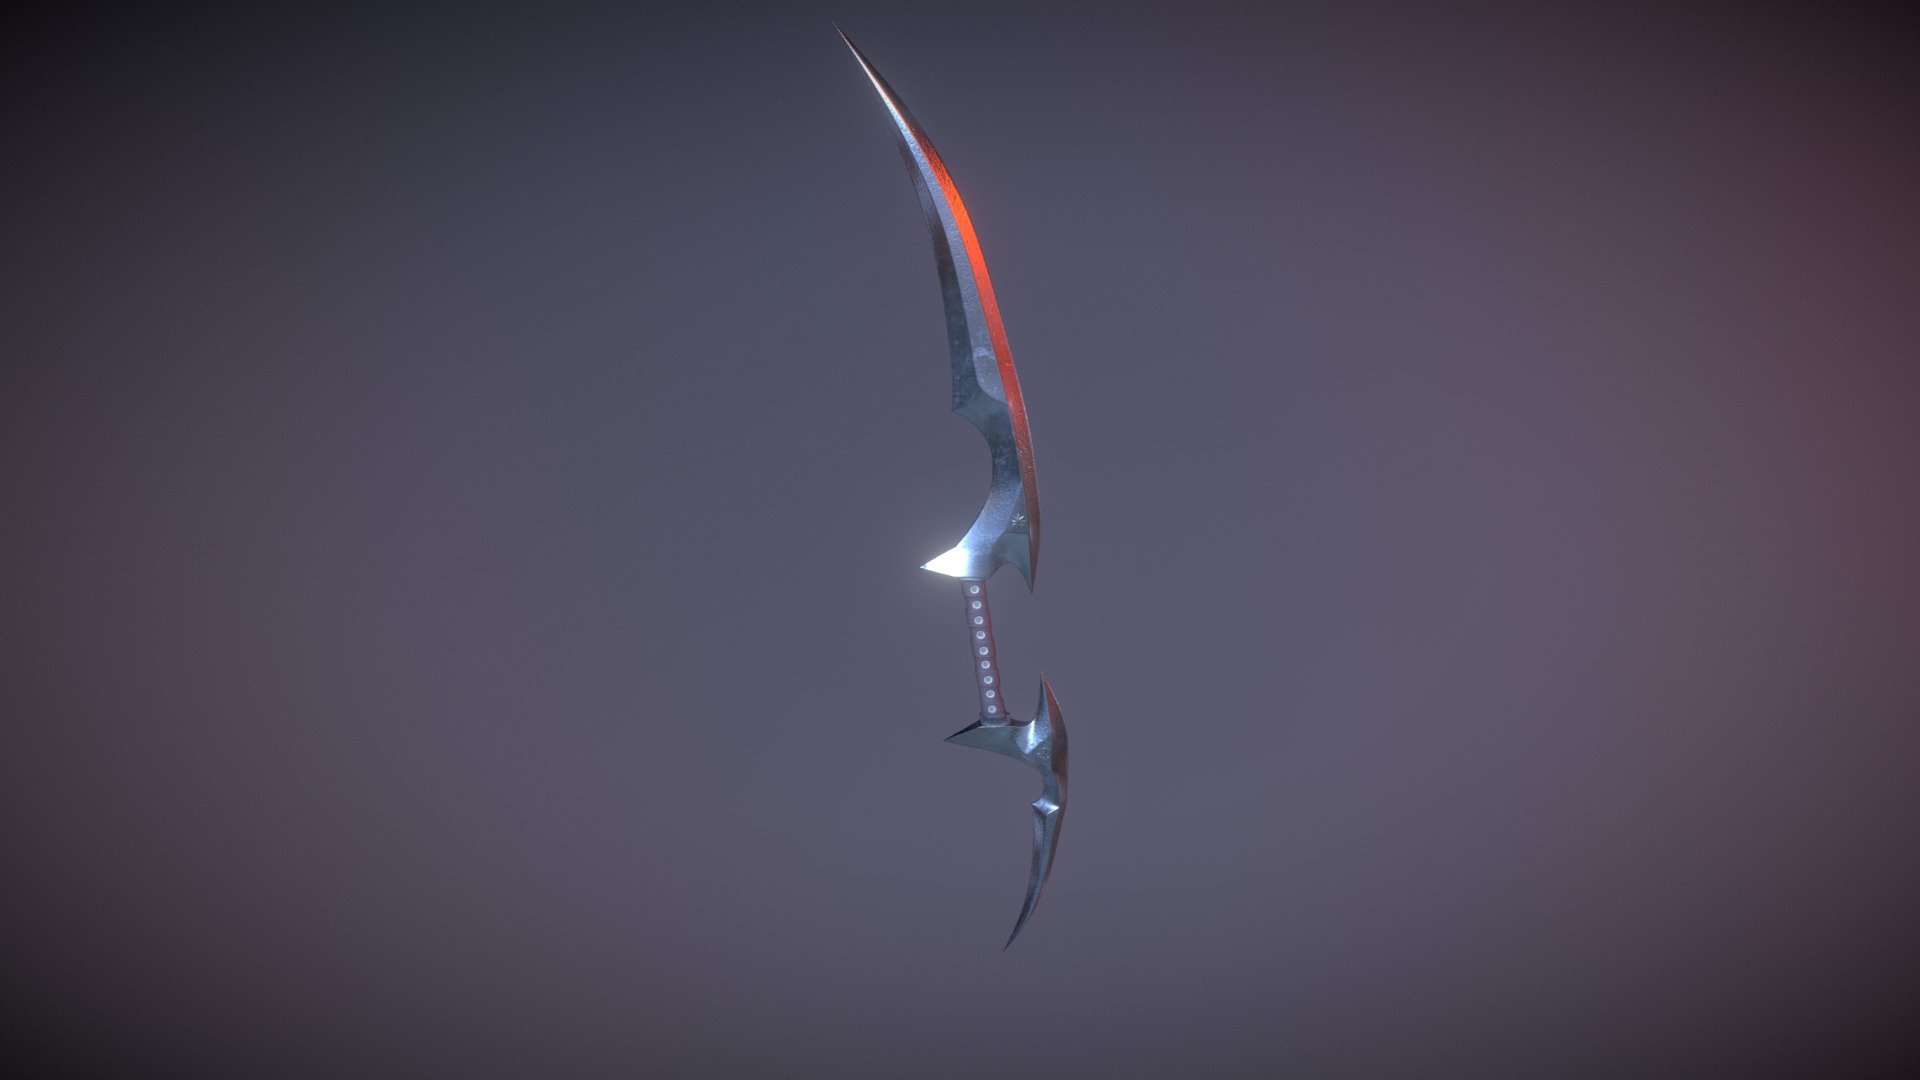 2018.2

Last Week  |  Next Week
So this is kinda like the Nameless Blade from Dragon Age: Inquisition that a friend suggest I make. I didn't have as much time to work on it this week so it was actually a pretty quick job, less that a few hours of work. The texture job is pretty basic and I was mainly just trying things out in Substance Painter. So I might try learning Substance Designer to get some unique textures to help me express the model correctly 3d model